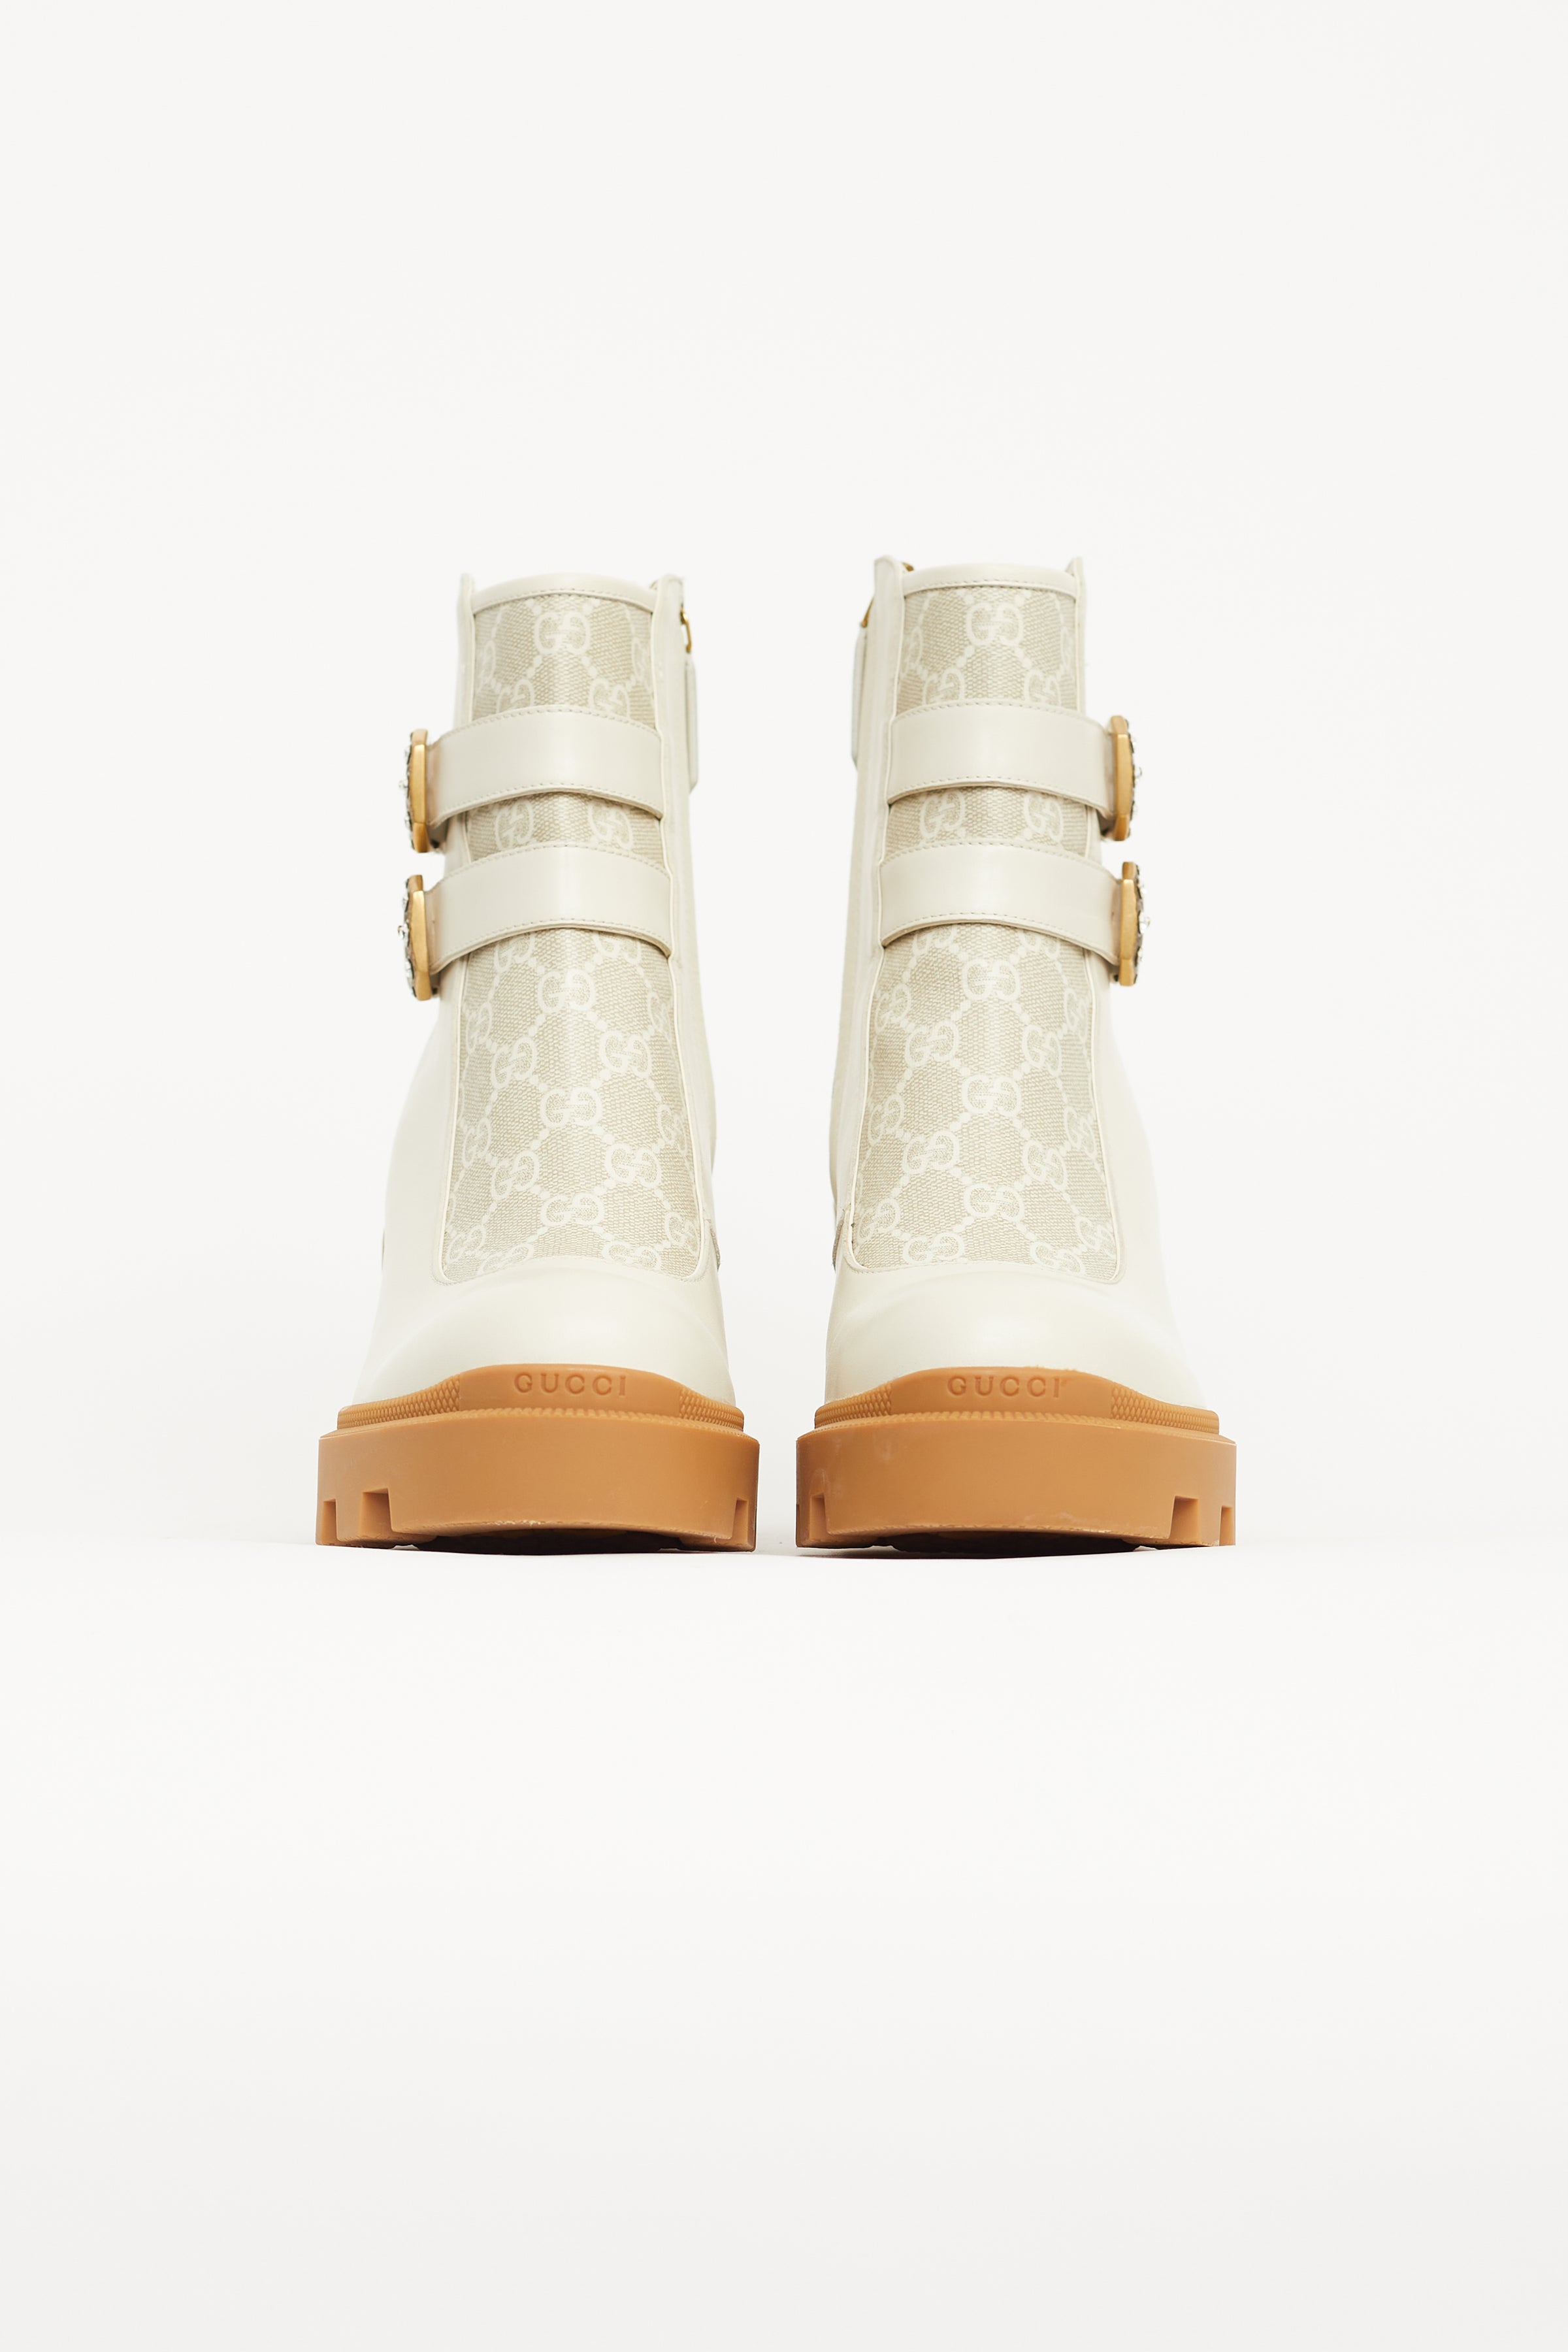 Luxuria & Co.: Louis Vuitton & Gucci Fall Boots & Sneaker Boots